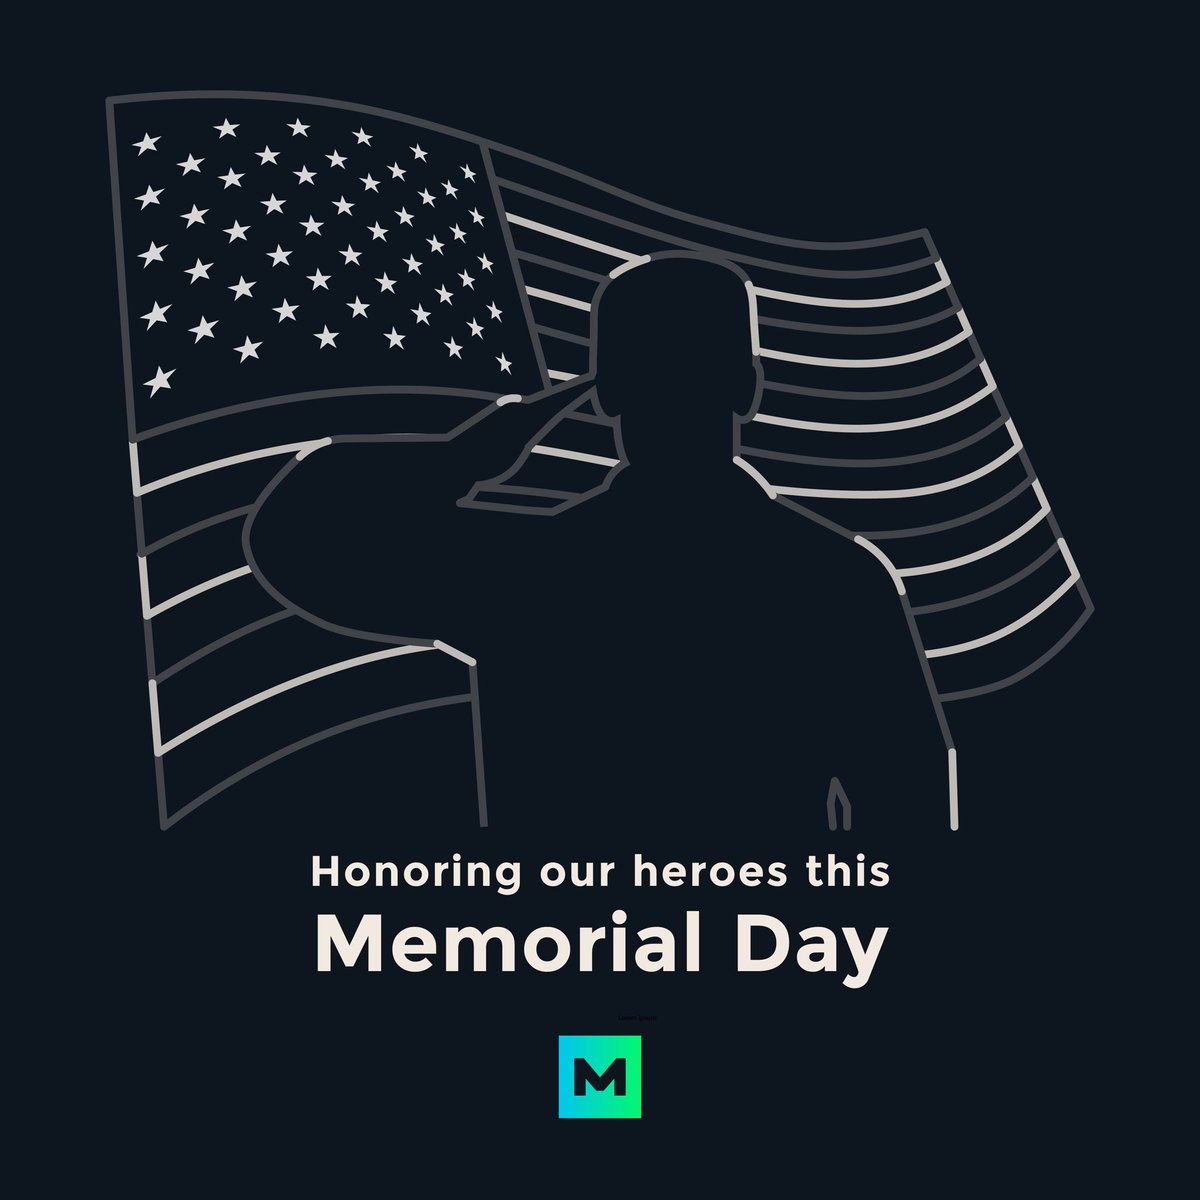 As we observe Memorial Day, we honor the courage and sacrifice of the fallen heroes who have served our nation. Their unwavering commitment to freedom and security inspires us all.